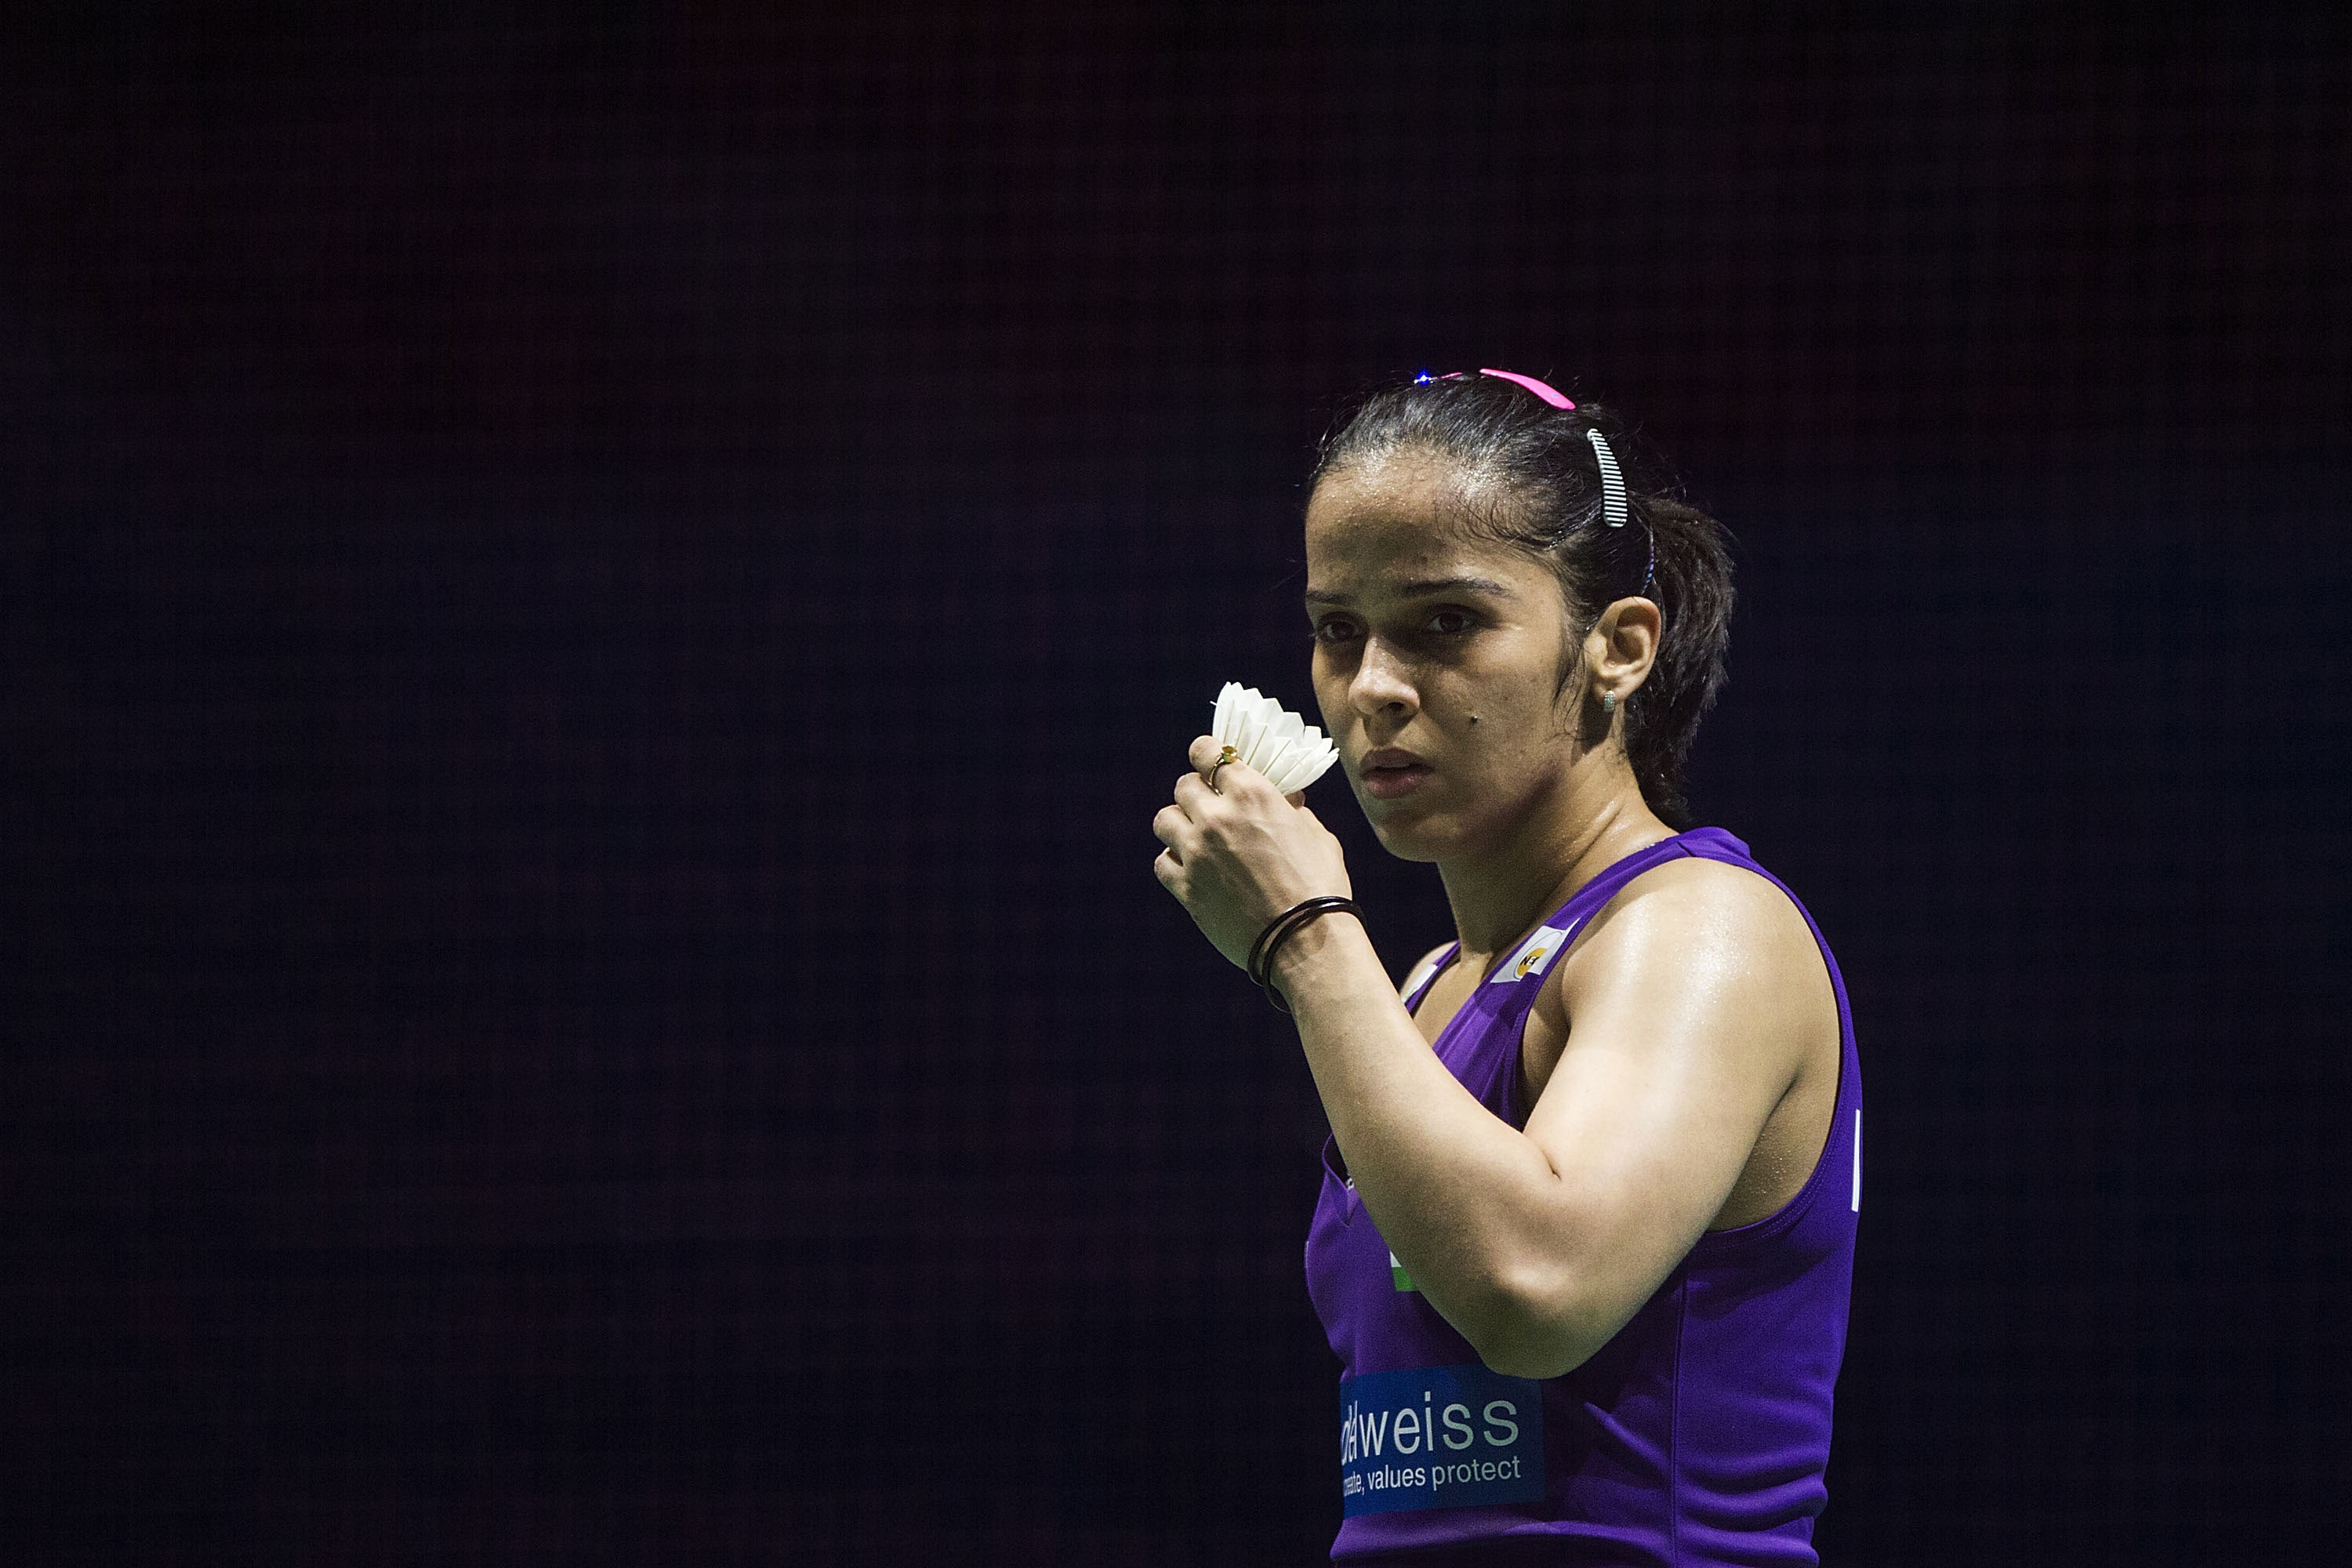 Denmark Open 2018 | Saina Nehwal goes down fighting against Tai Tzu Ying in final